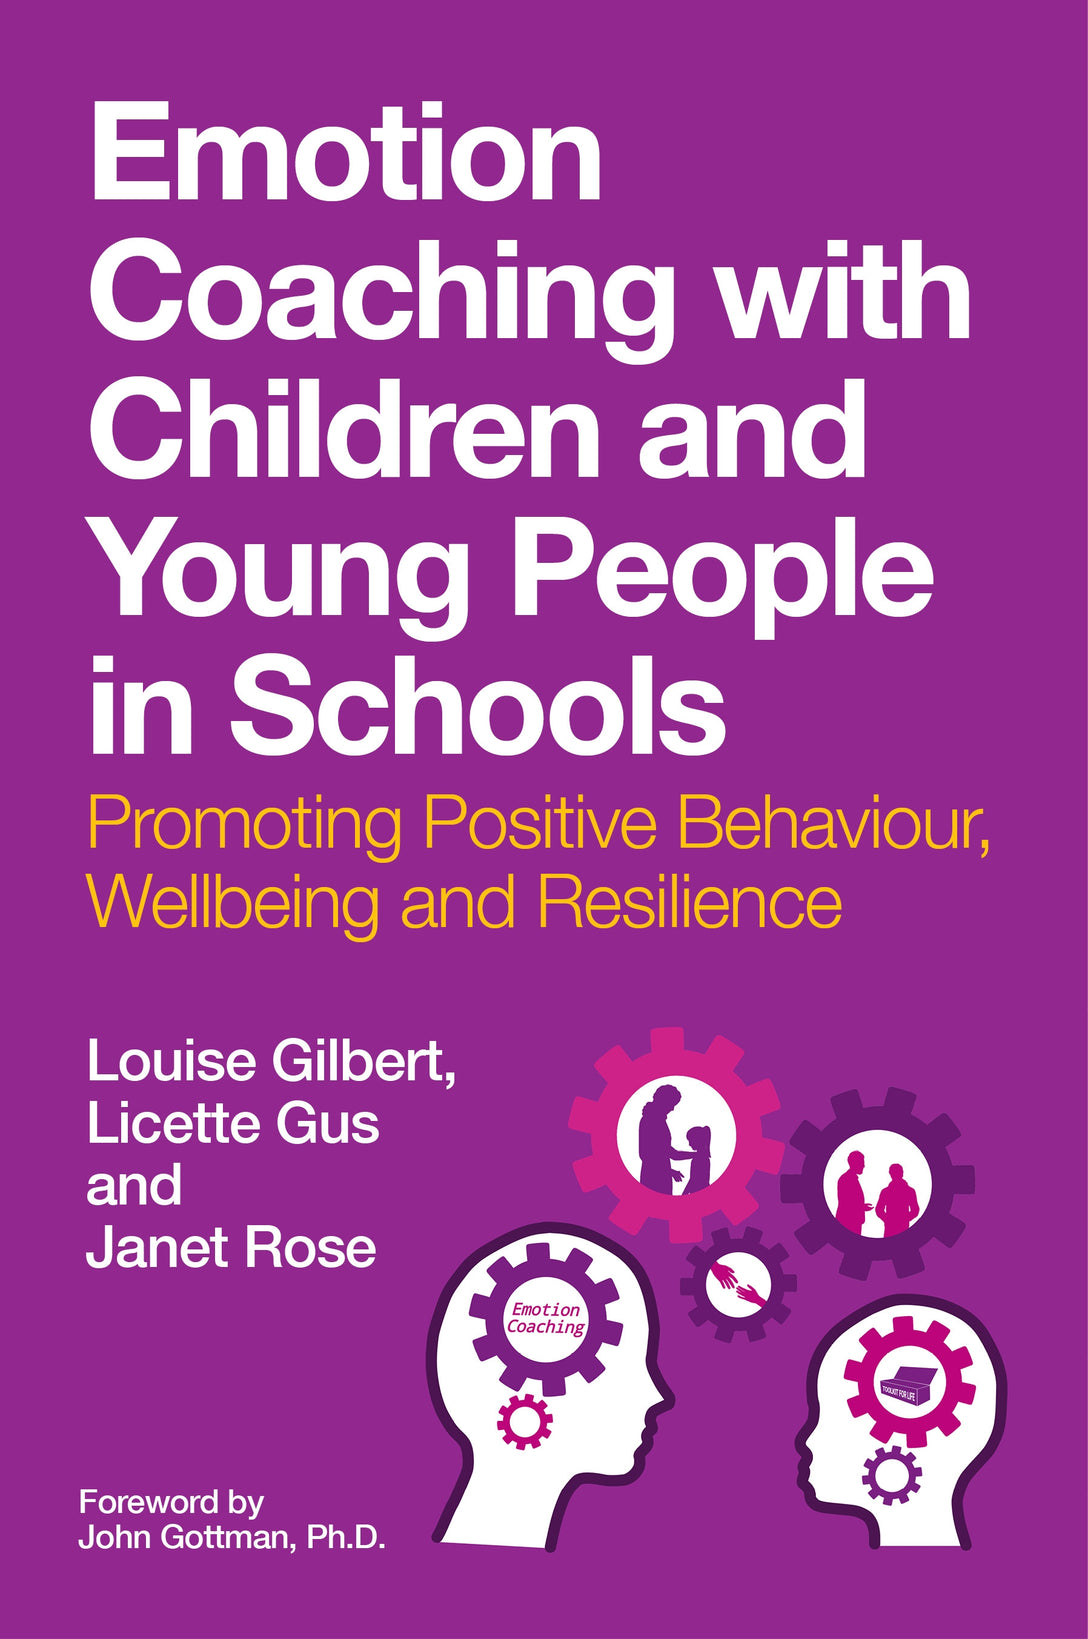 Emotion Coaching with Children and Young People in Schools by Louise Gilbert, Licette Gus, Janet Rose, John Gottman